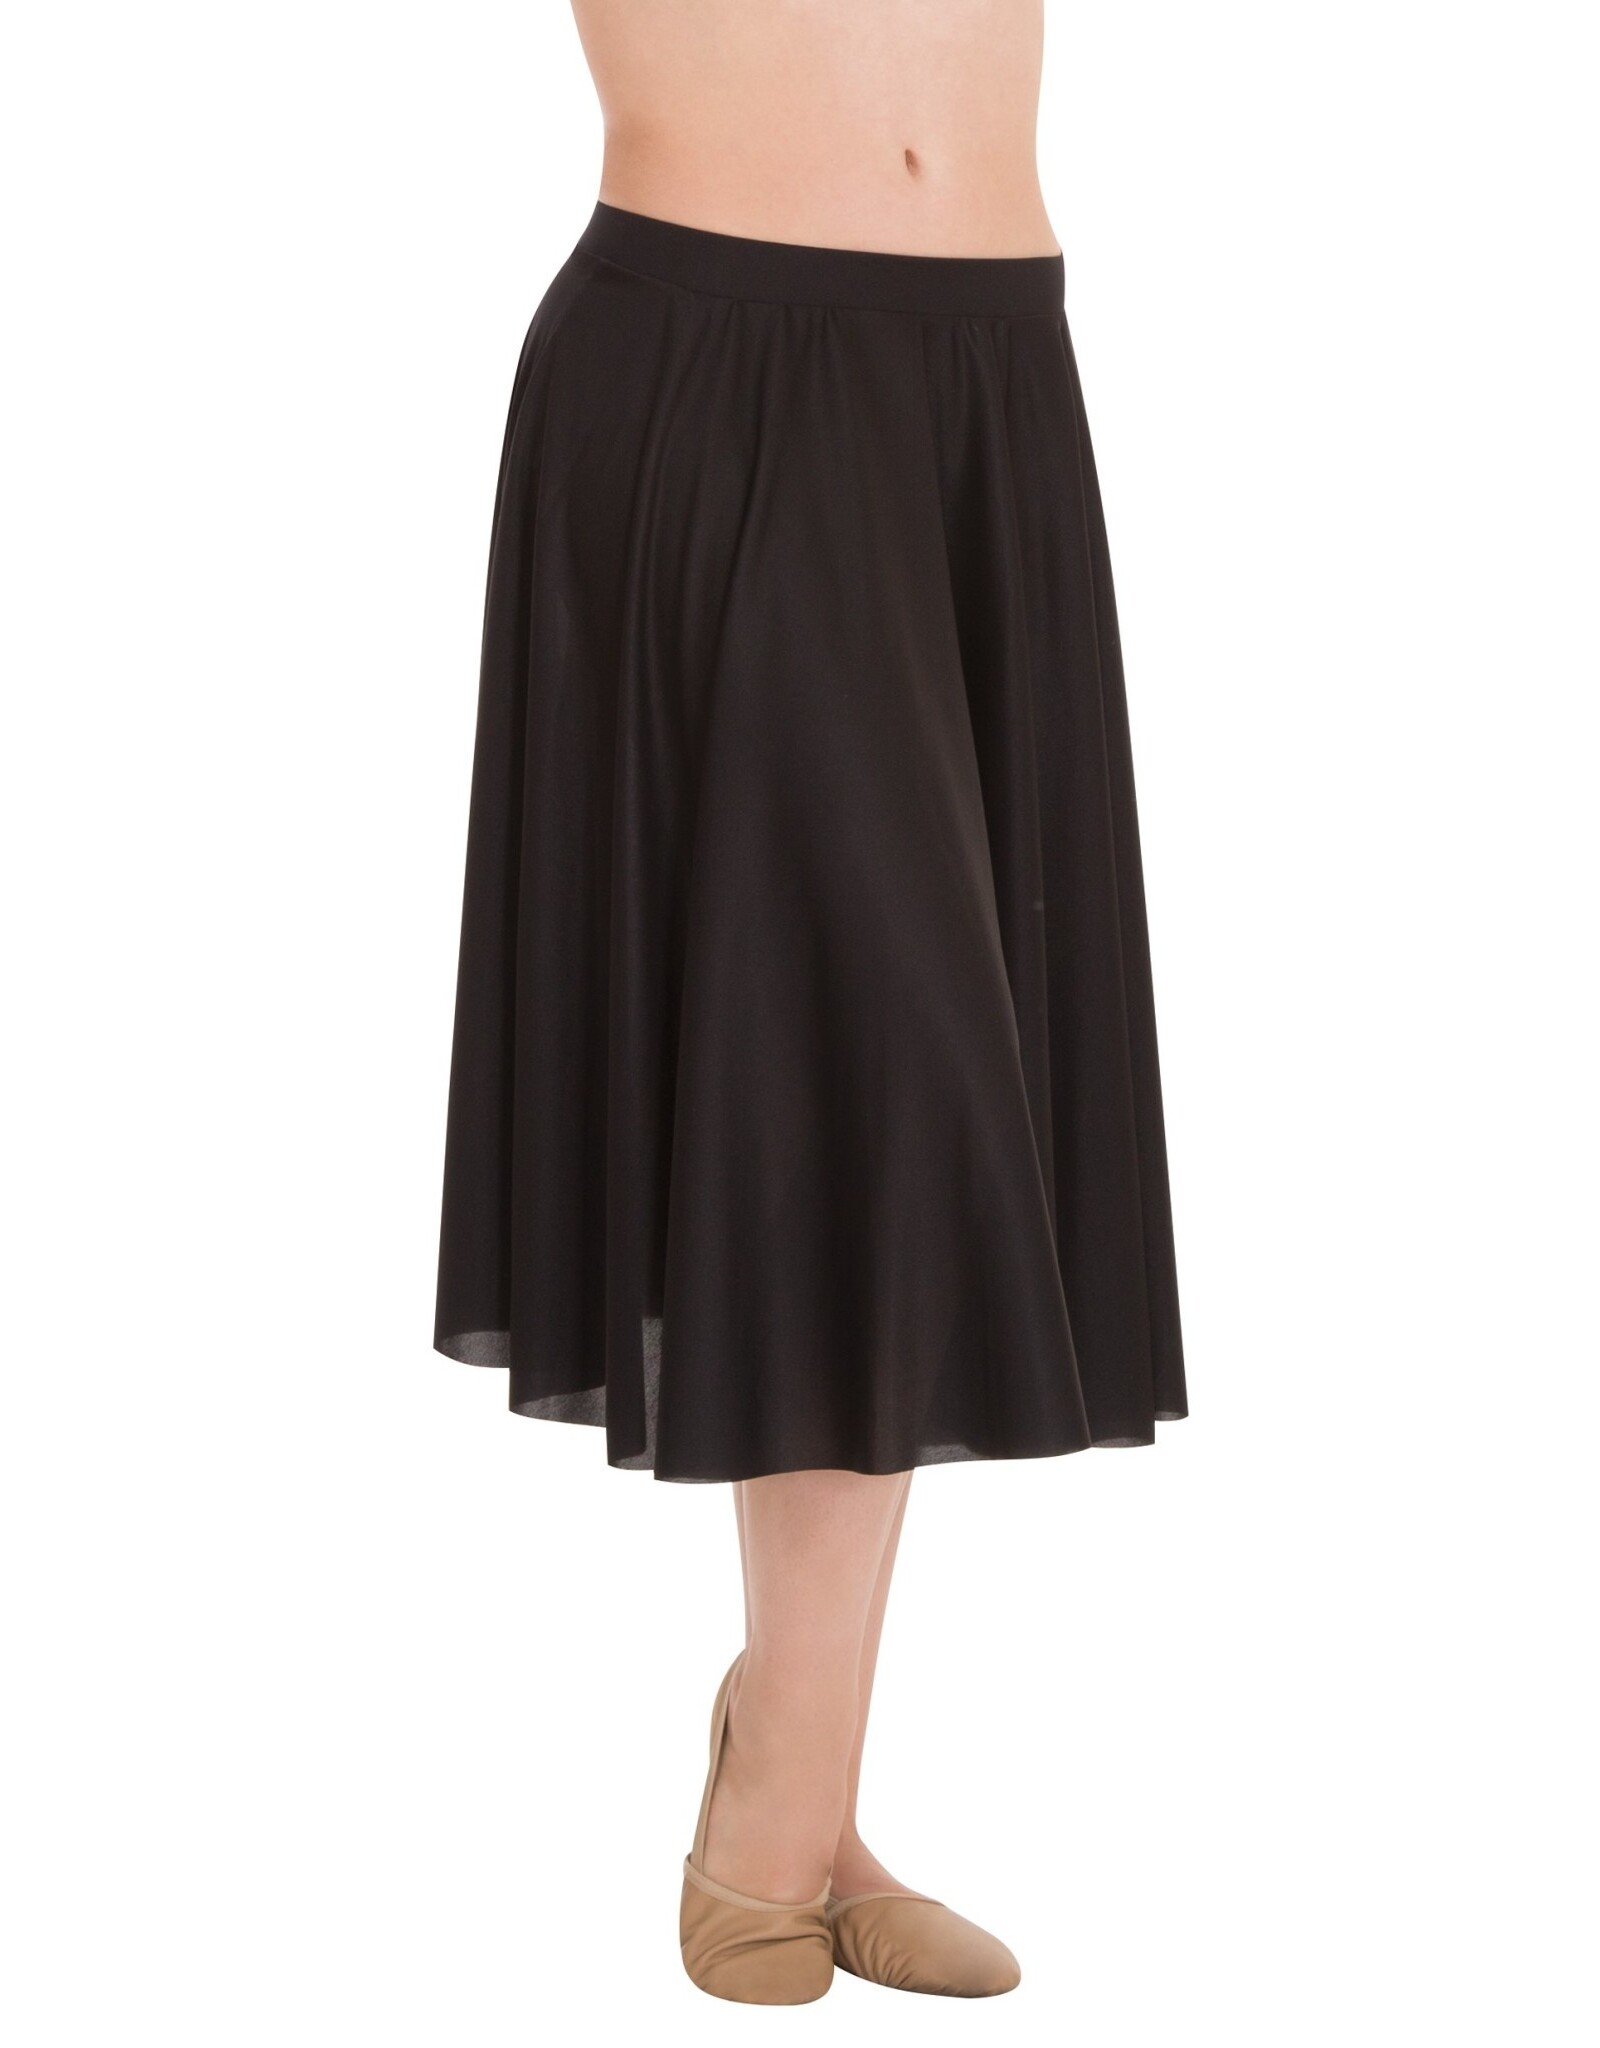 Body Wrappers Adult Dance Below-The-Knee Circle Skirt (511)